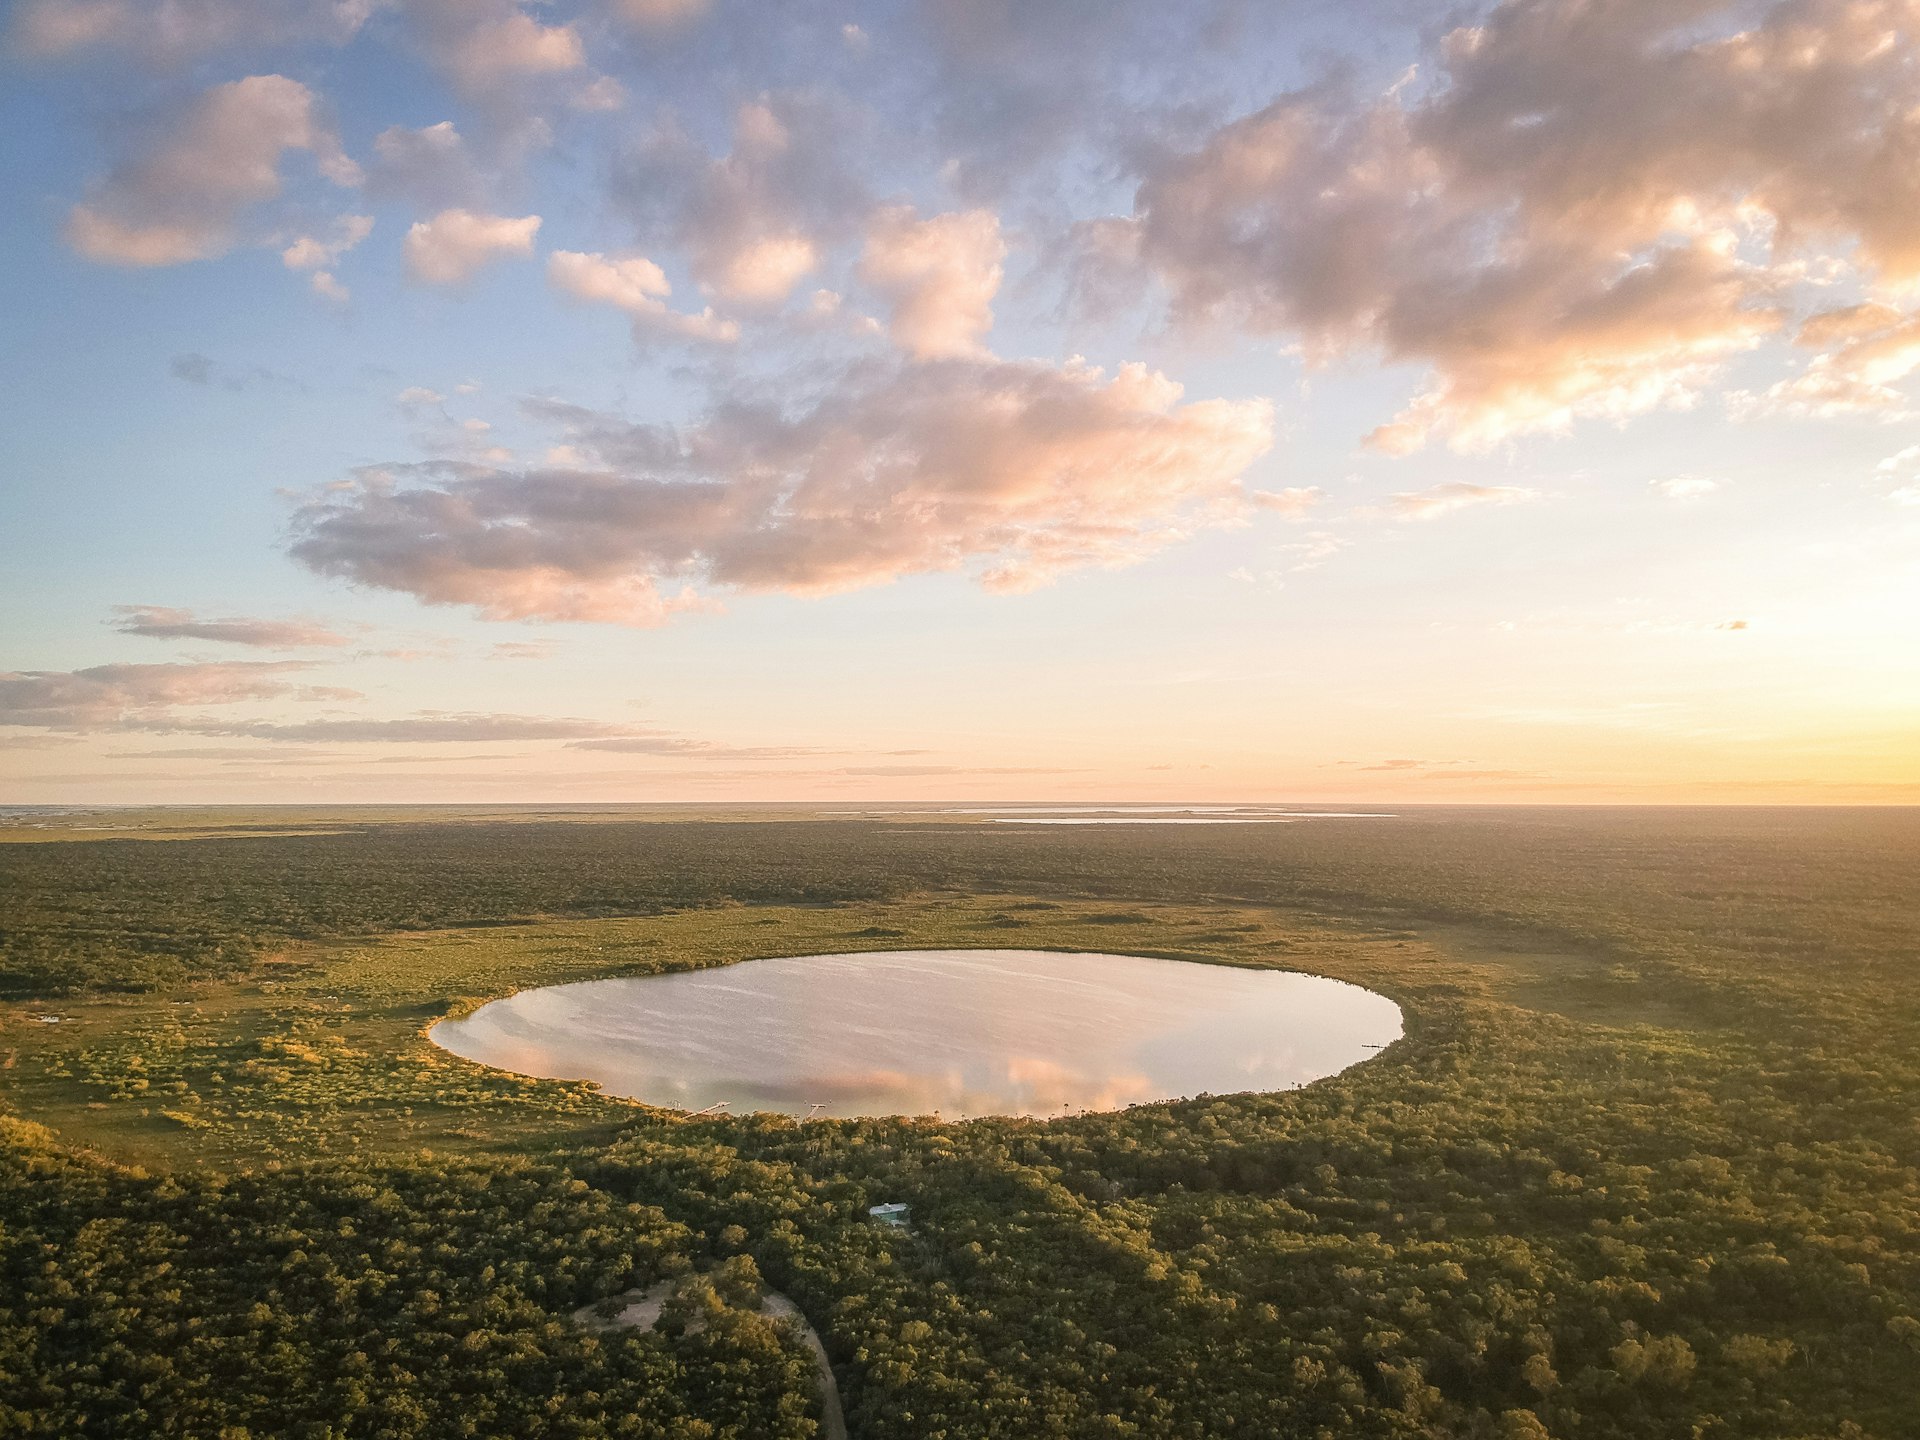 The sun sets over a perfectly circular lagoon surrounded by jungle